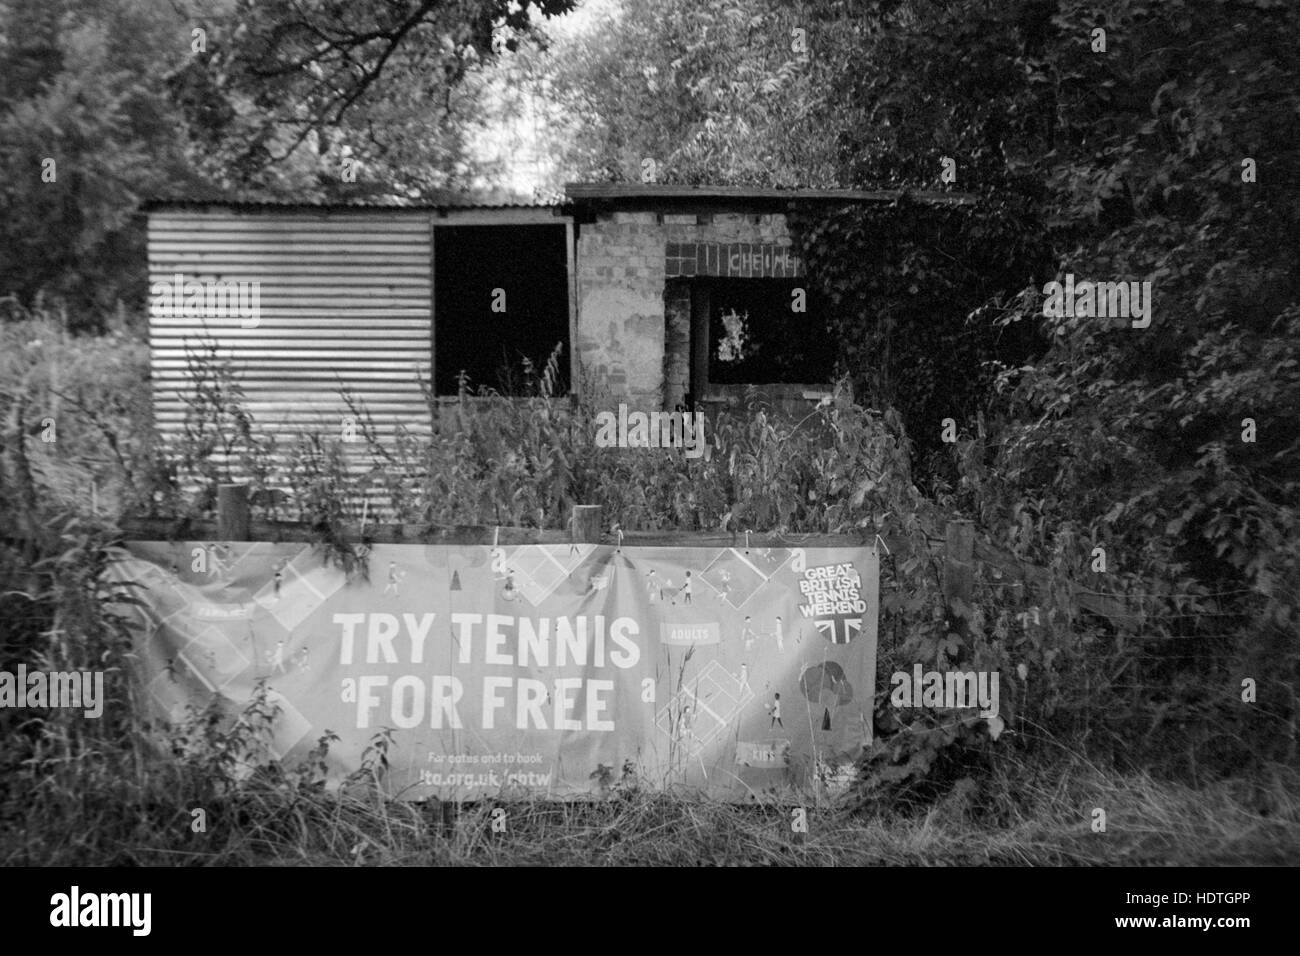 a tumbledown shack with a try tennis for free banner in front england uk Stock Photo